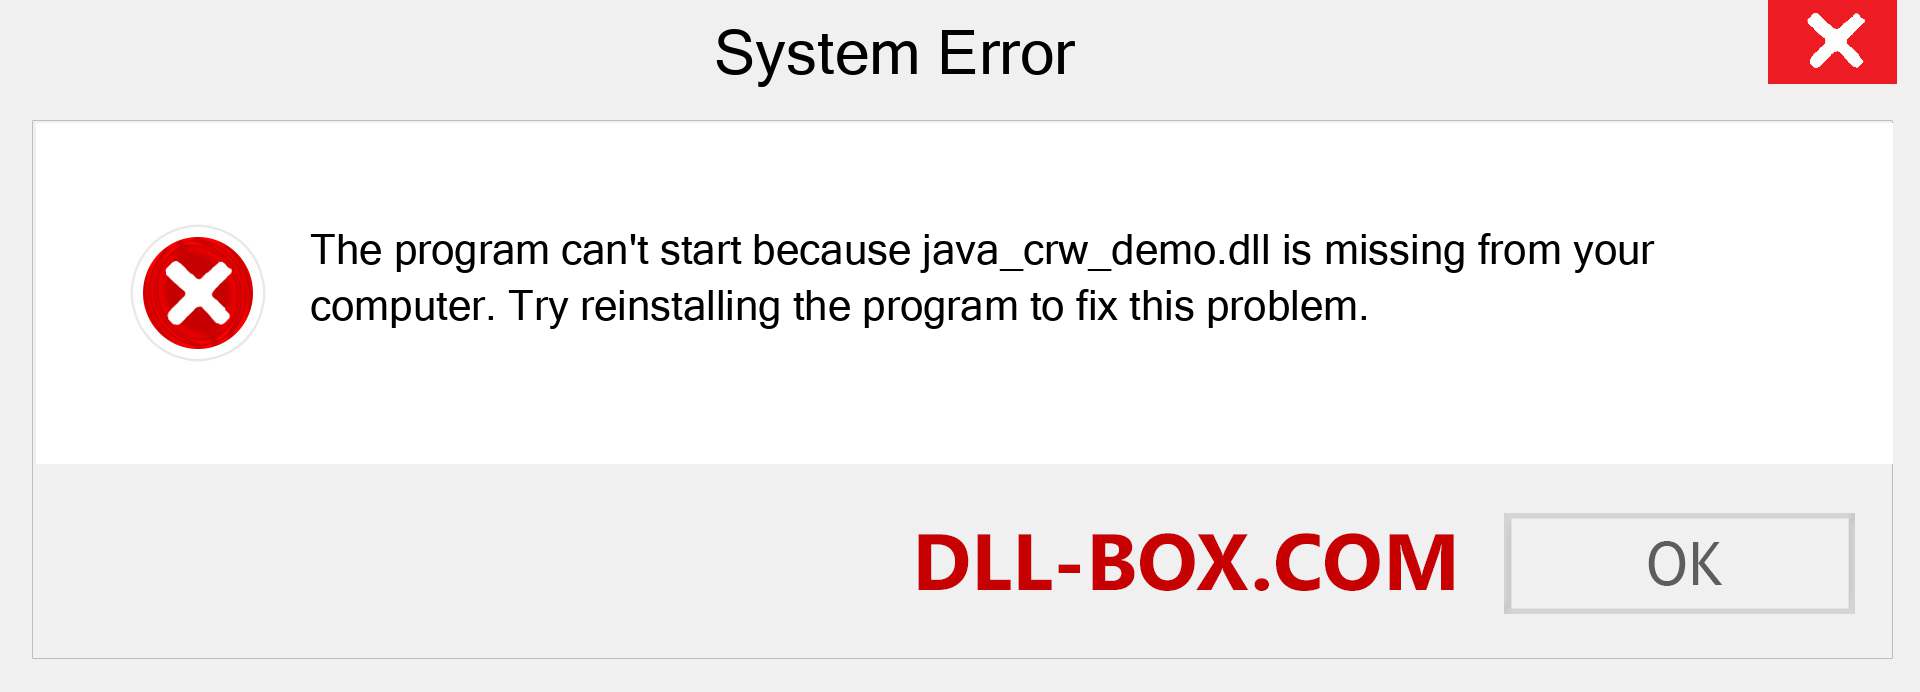  java_crw_demo.dll file is missing?. Download for Windows 7, 8, 10 - Fix  java_crw_demo dll Missing Error on Windows, photos, images